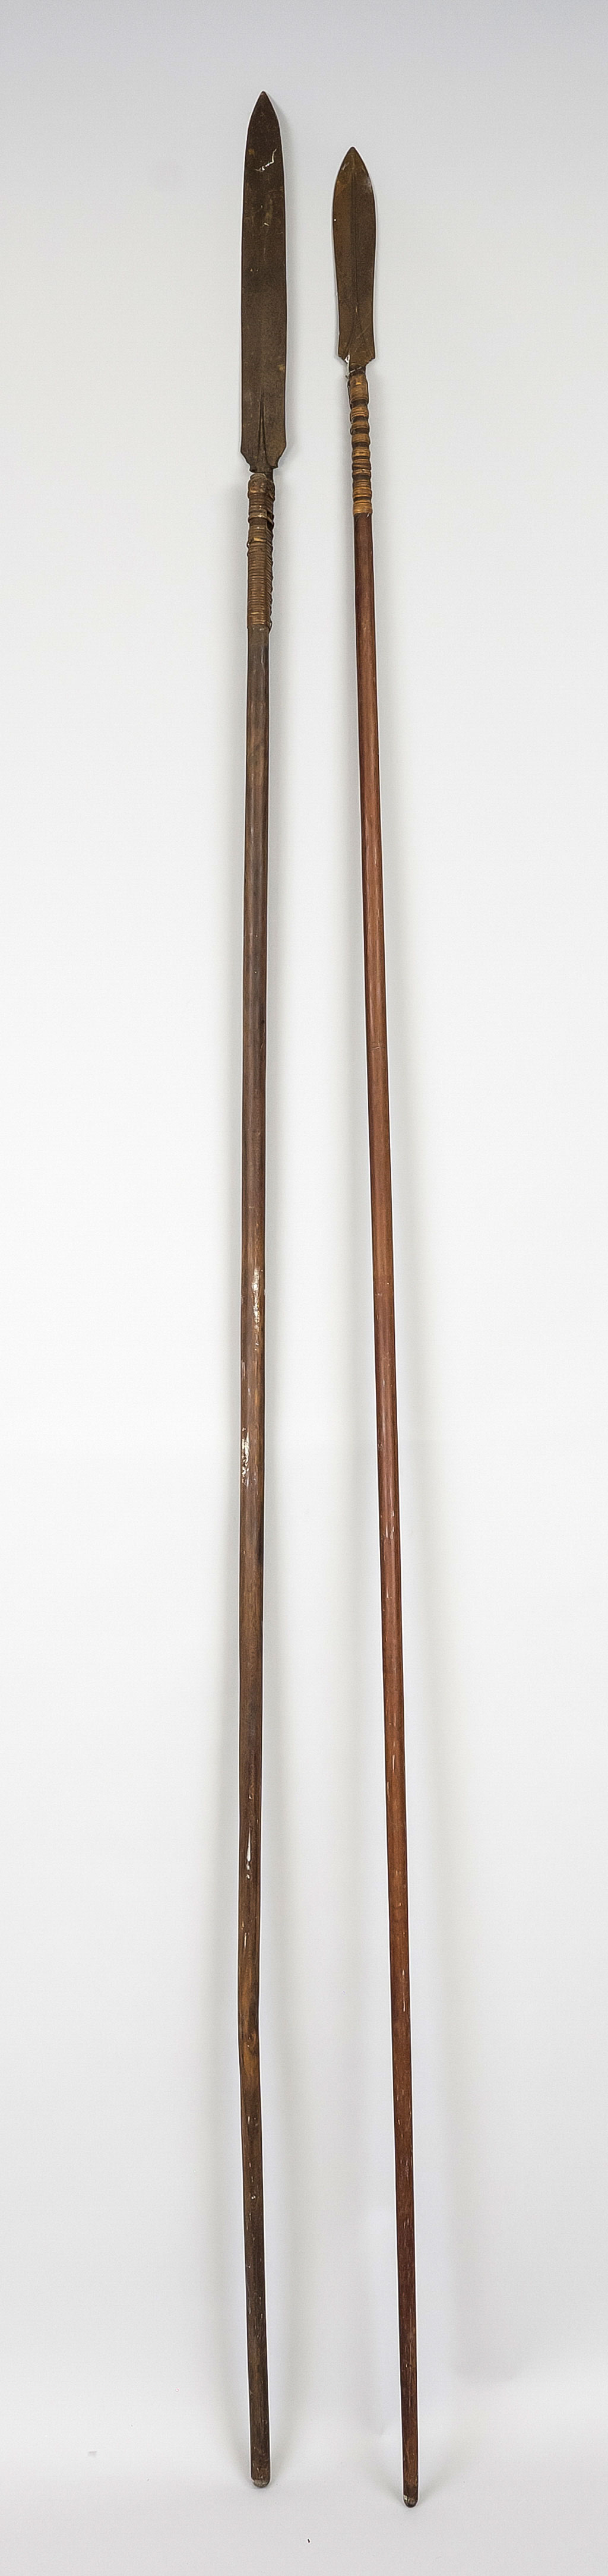 Javelin, probably Borneo 19th century. Wood with iron tip, double-edged, wing-shaped, bound with